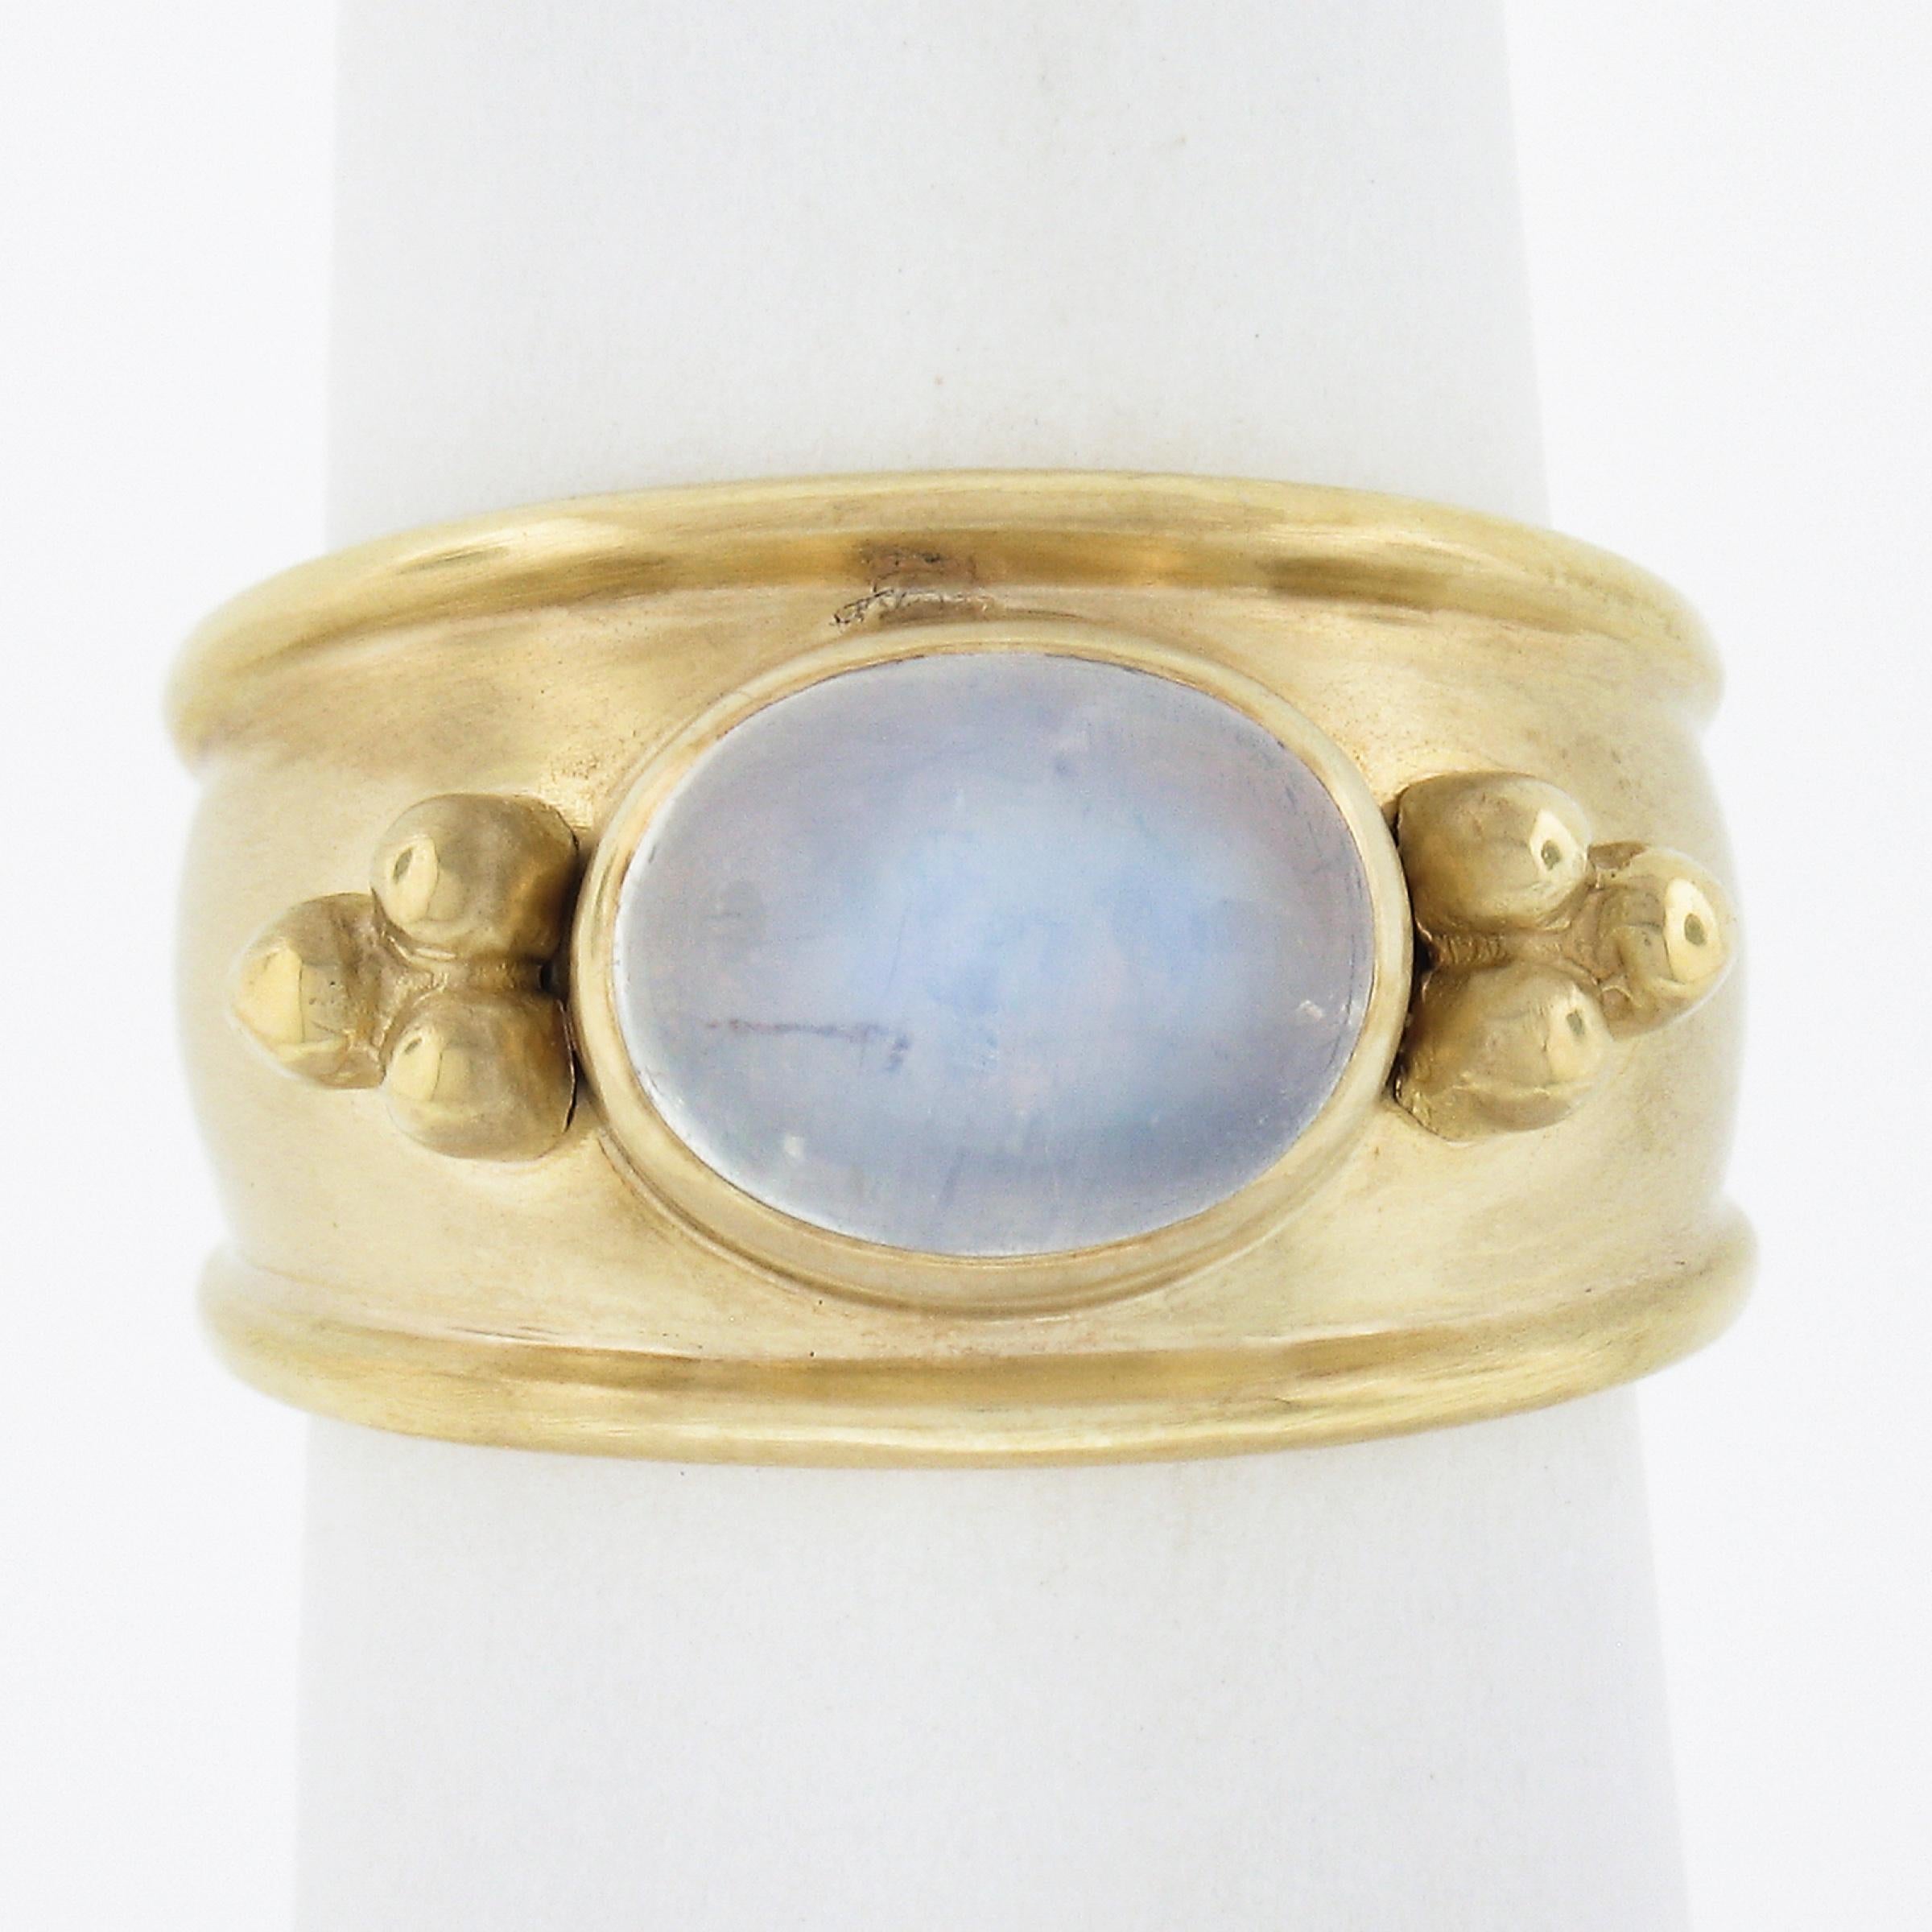 --Stone(s):--
(1) Natural Genuine Moonstone - Oval Cabochon Cut - Bezel Set - Transparent White Color w/ Blue Play - 9.5x7.5mm (approx.)

Material: Solid 14k Yellow Gold
Weight: 8.61 Grams
Ring Size: 6.5 (Fitted on a finger. We can Not custom size